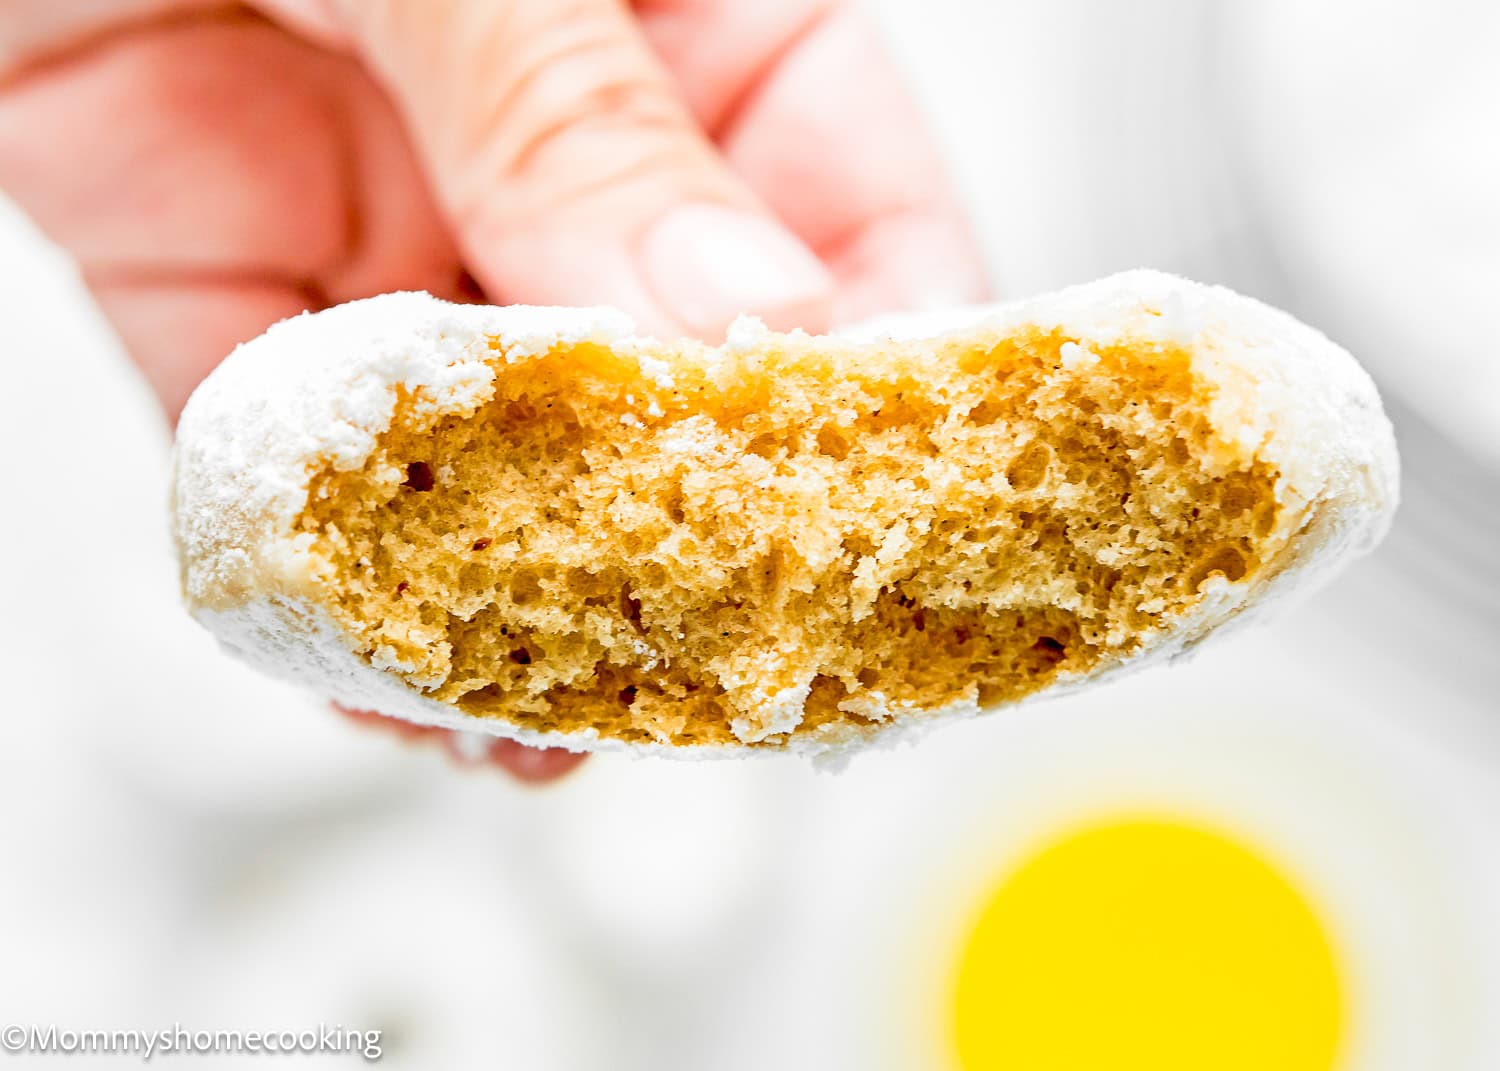 a woman hand holding aEggless Old Fashioned Powdered Sugar Donut showing its inside fluffy texture.